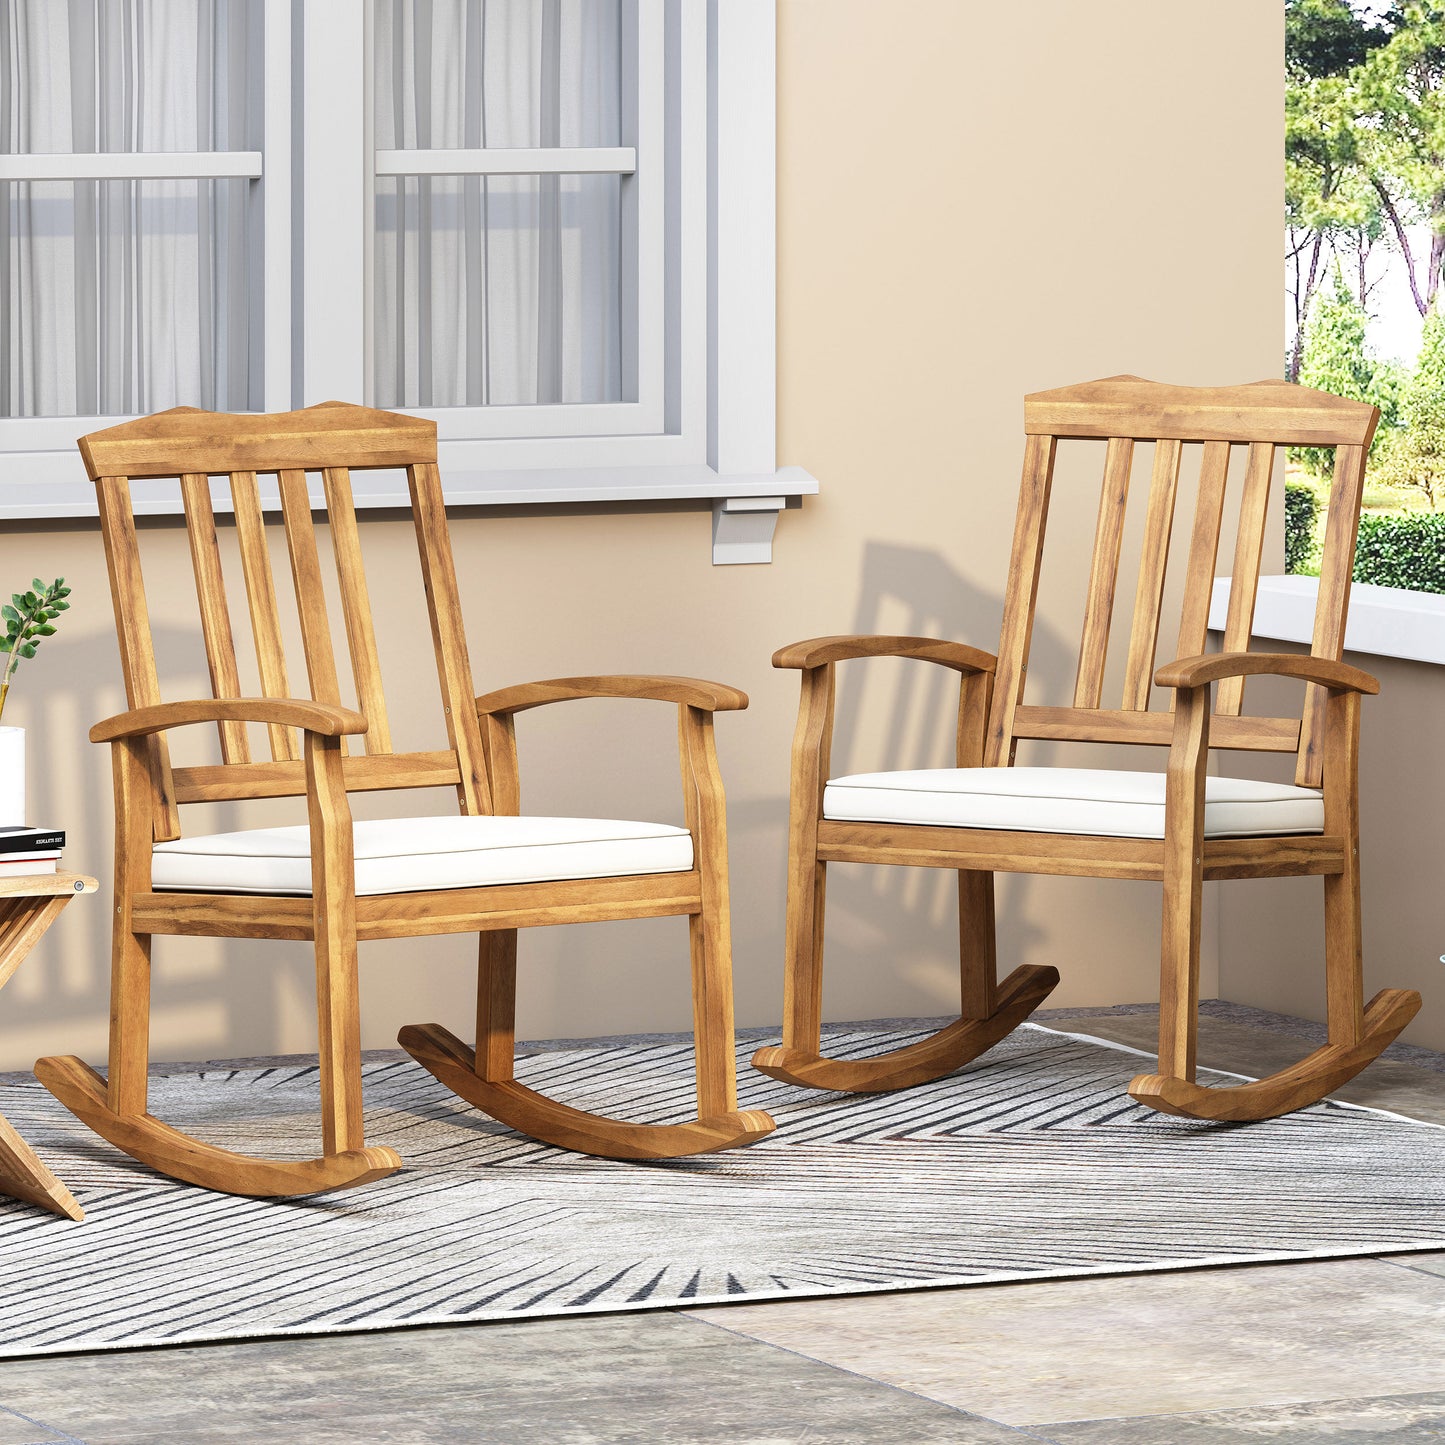 Kessler Outdoor Acacia Wood Rocking Chair with Cushion, Set of 2, Teak and Beige